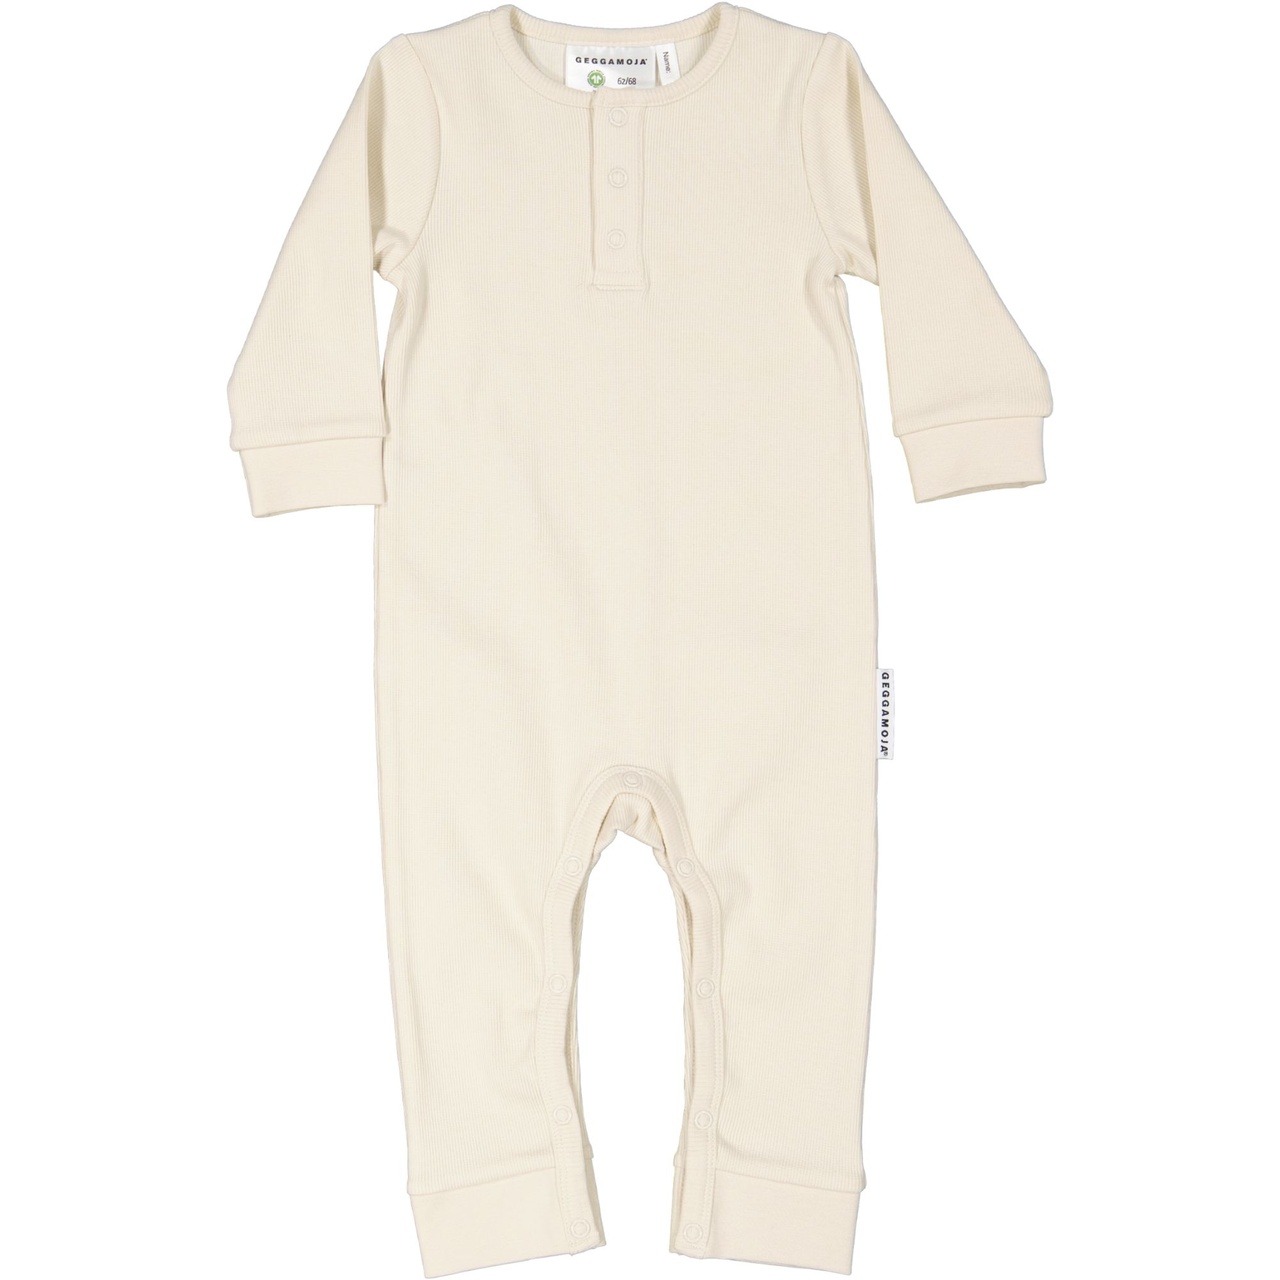 Baby suit Offwhite